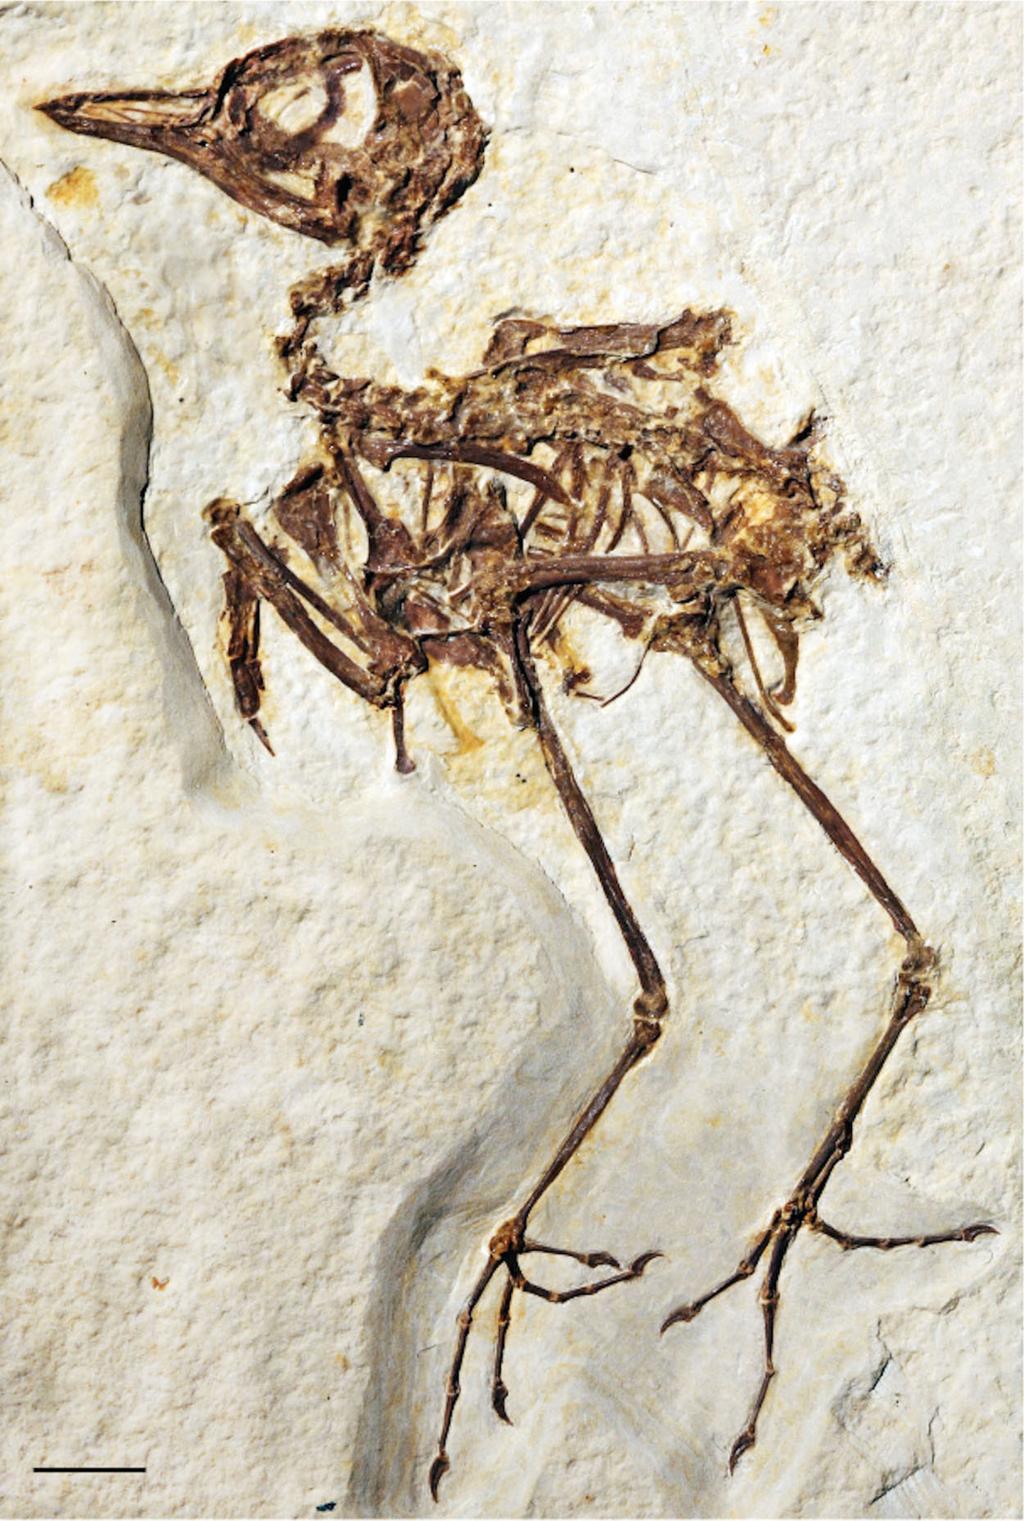 Figure 2 The holotype specimen of Zygodactylus grandei sp. nov. (FMNH PA 726) from the Green River Formation of Wyoming. Shown in left lateral view. Scale bar equals 1 cm. Full-size DOI: 10.